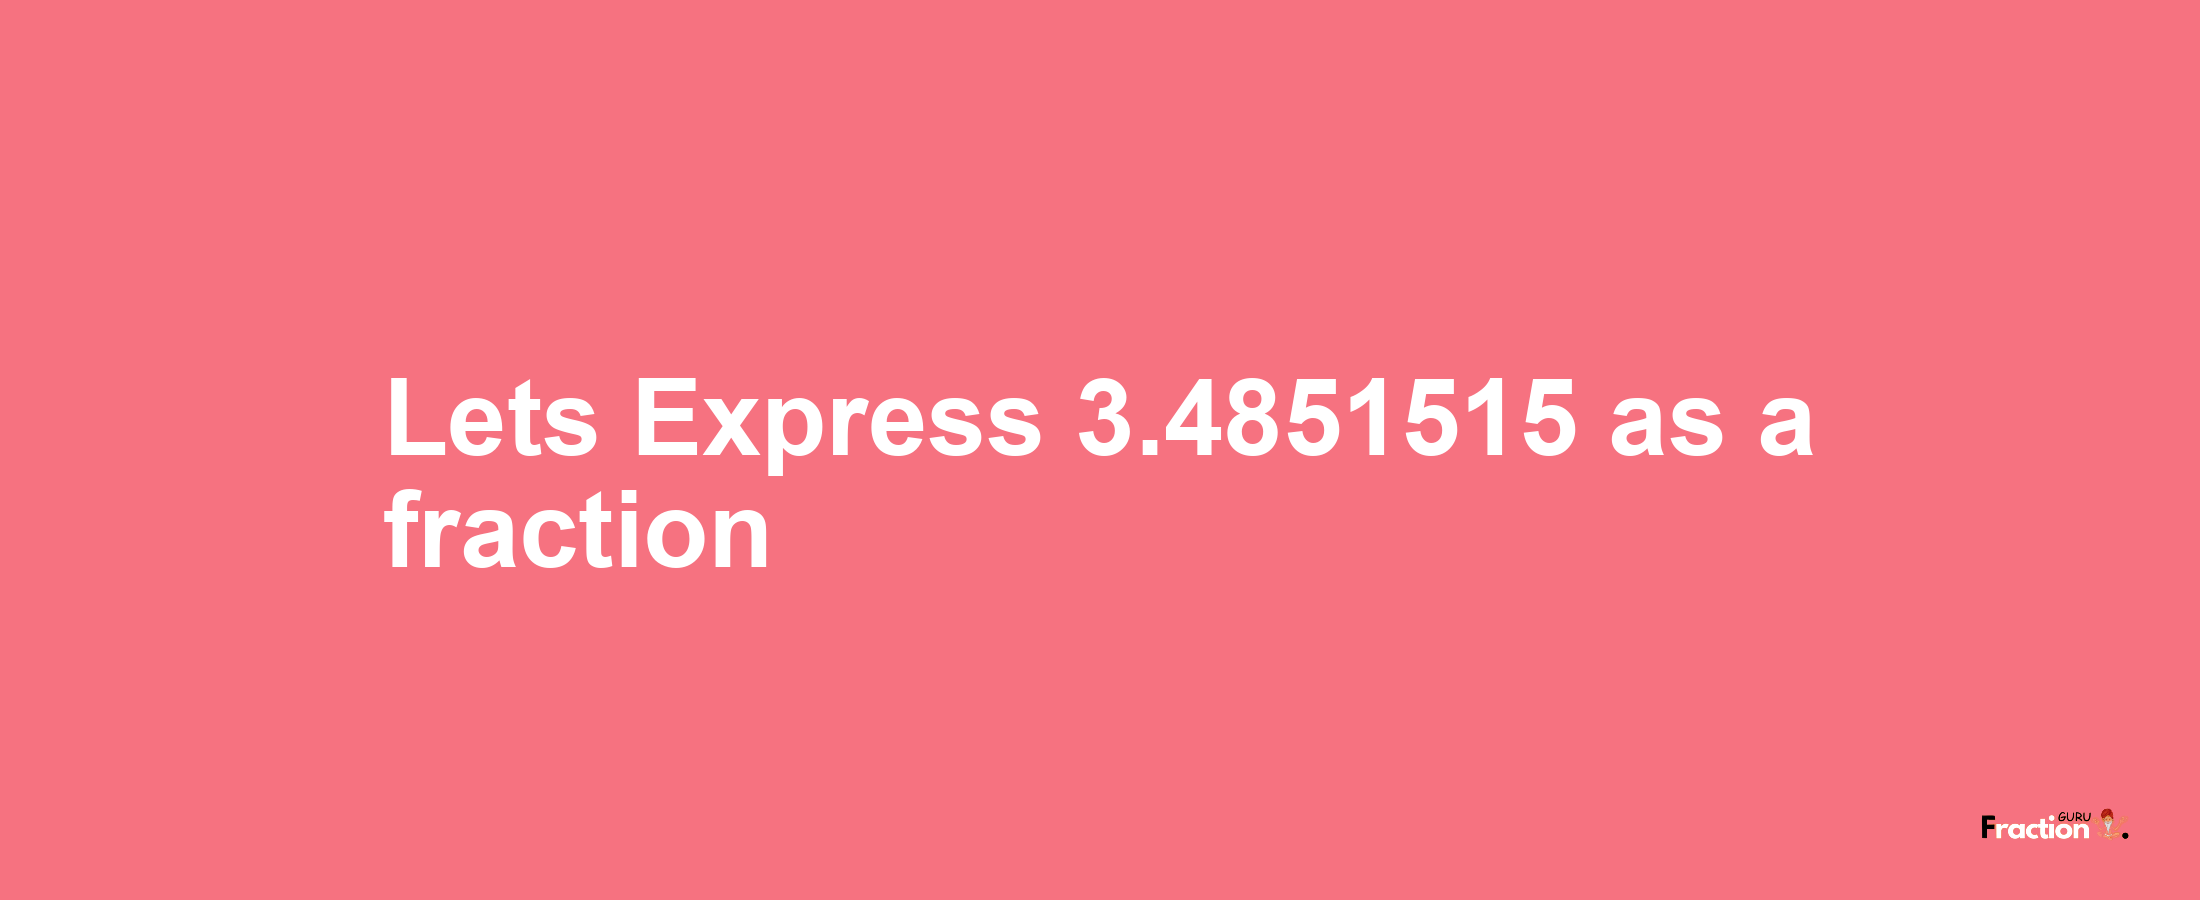 Lets Express 3.4851515 as afraction